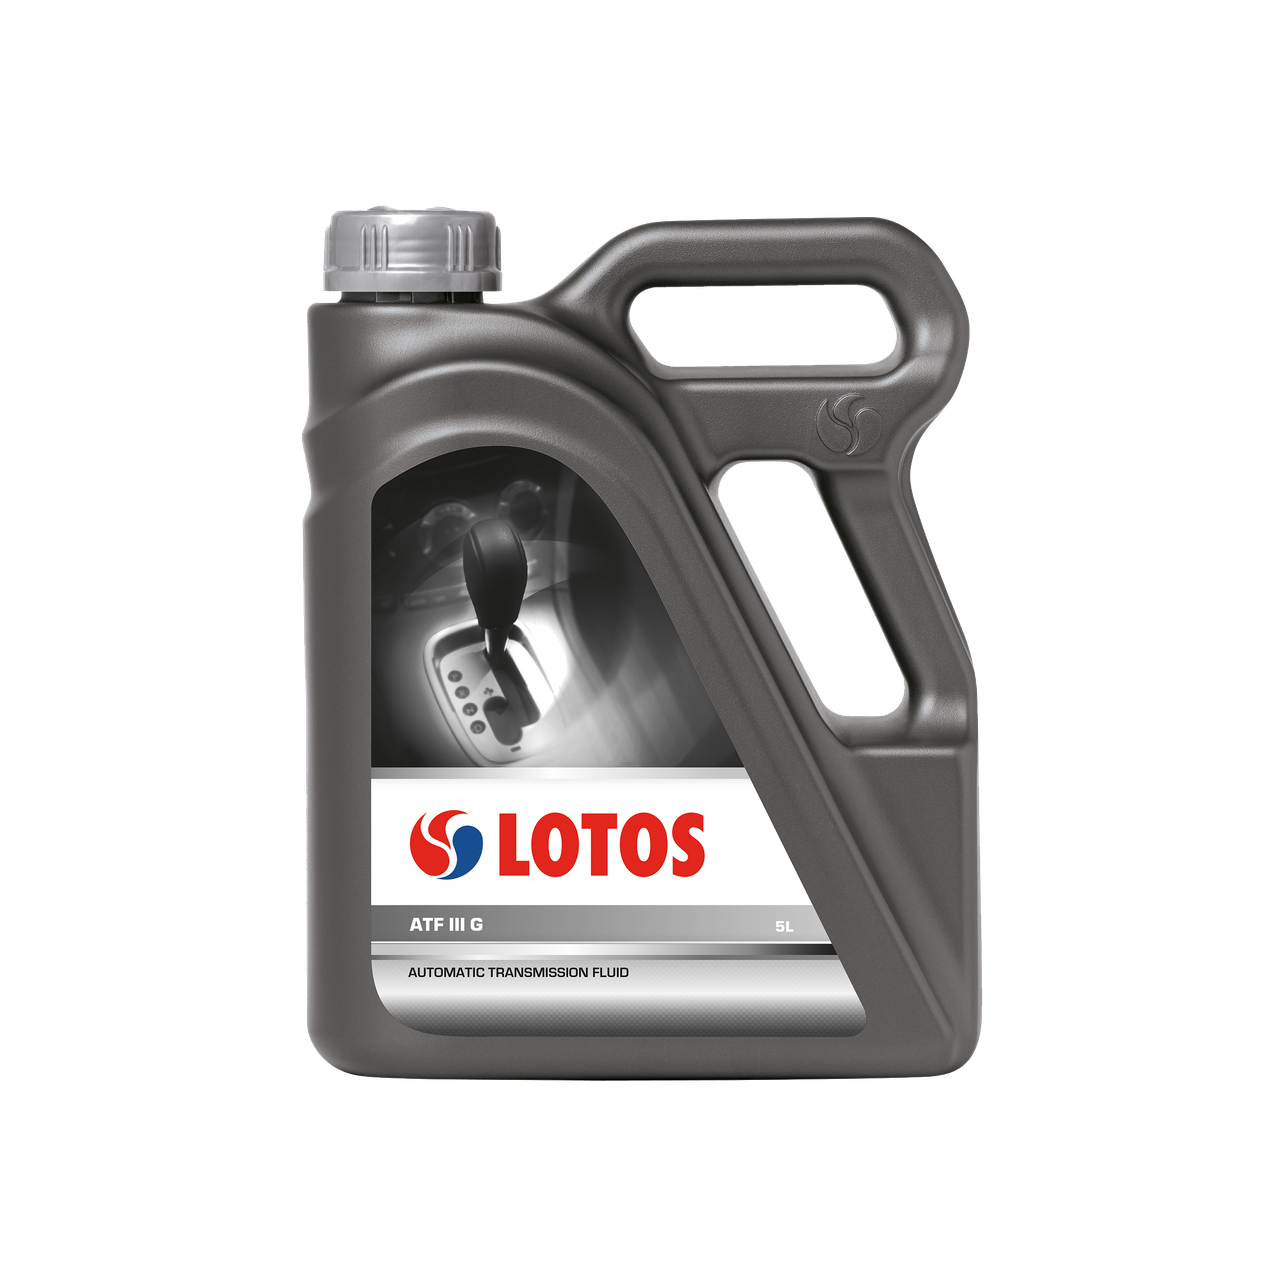 Lotos ATF wfk5087300h0. Масло Lotos ATF iid. Oil масло Lotos logo. Наклейки масел Lotos ATF 2d.